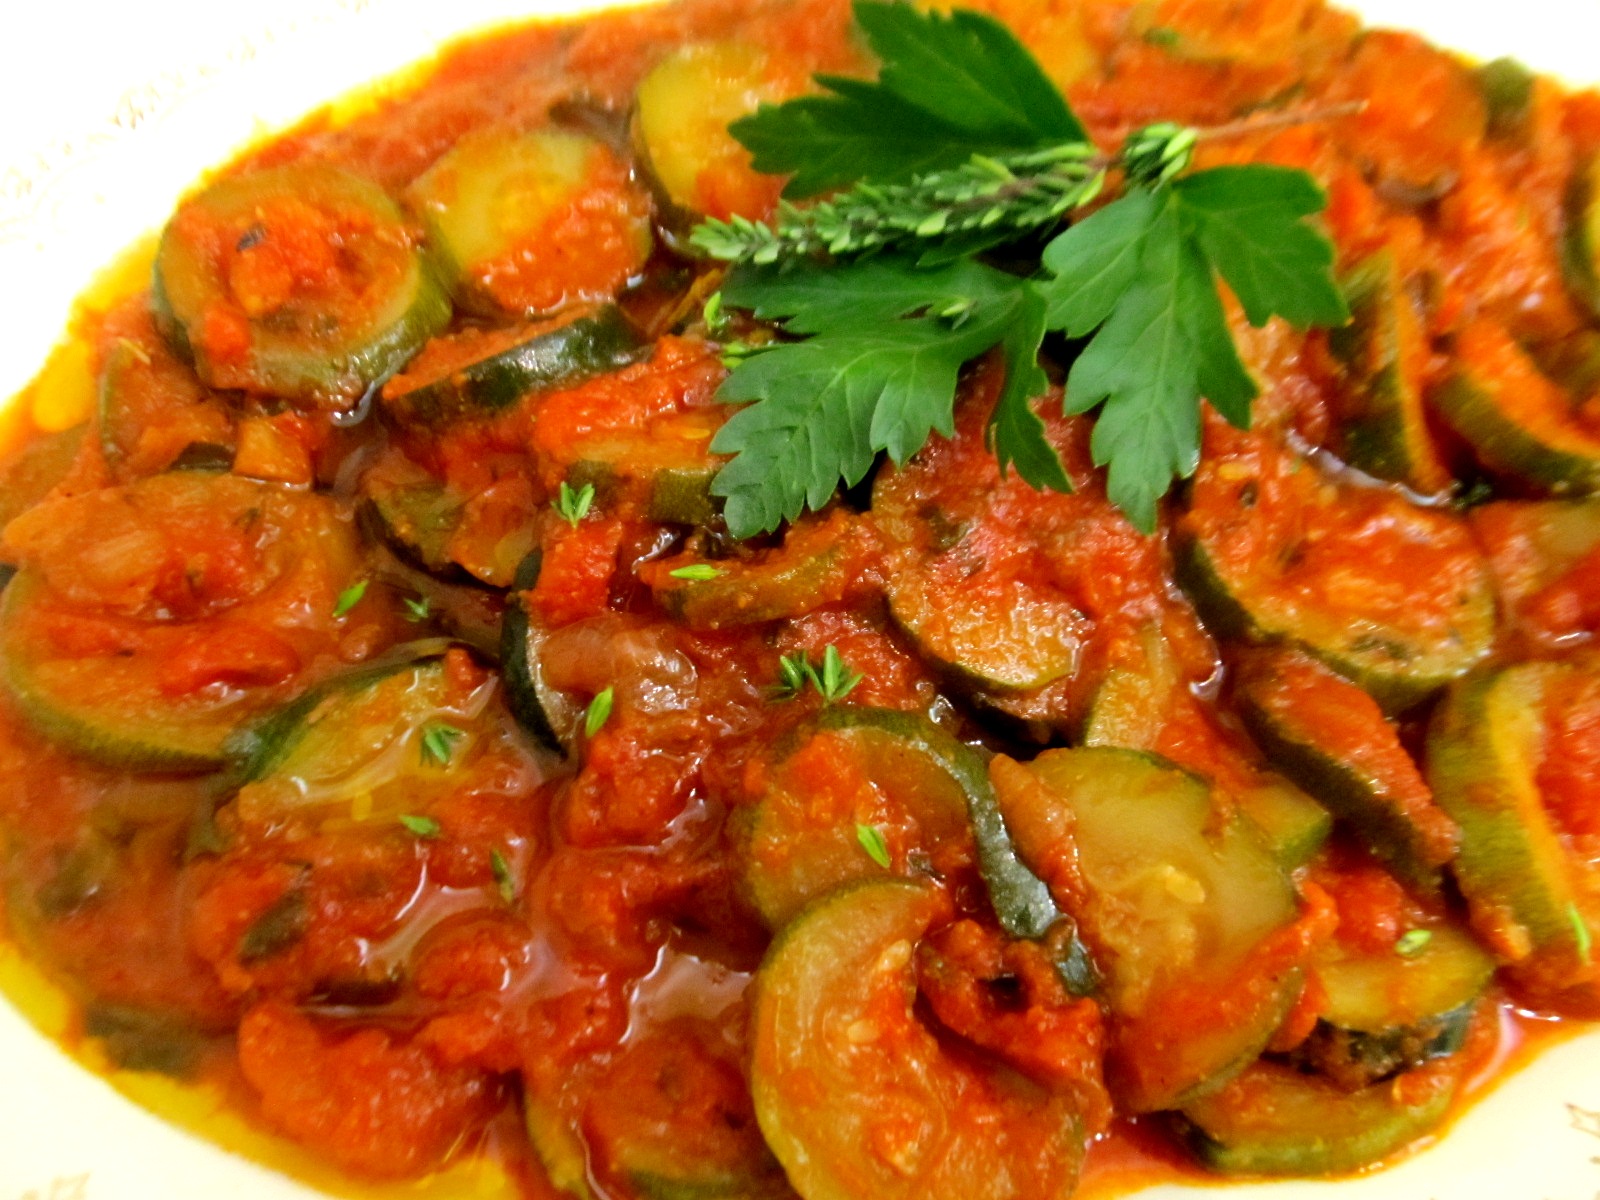 Food and Thrift: Zucchini in Tomato Sauce...and Restaurant Review